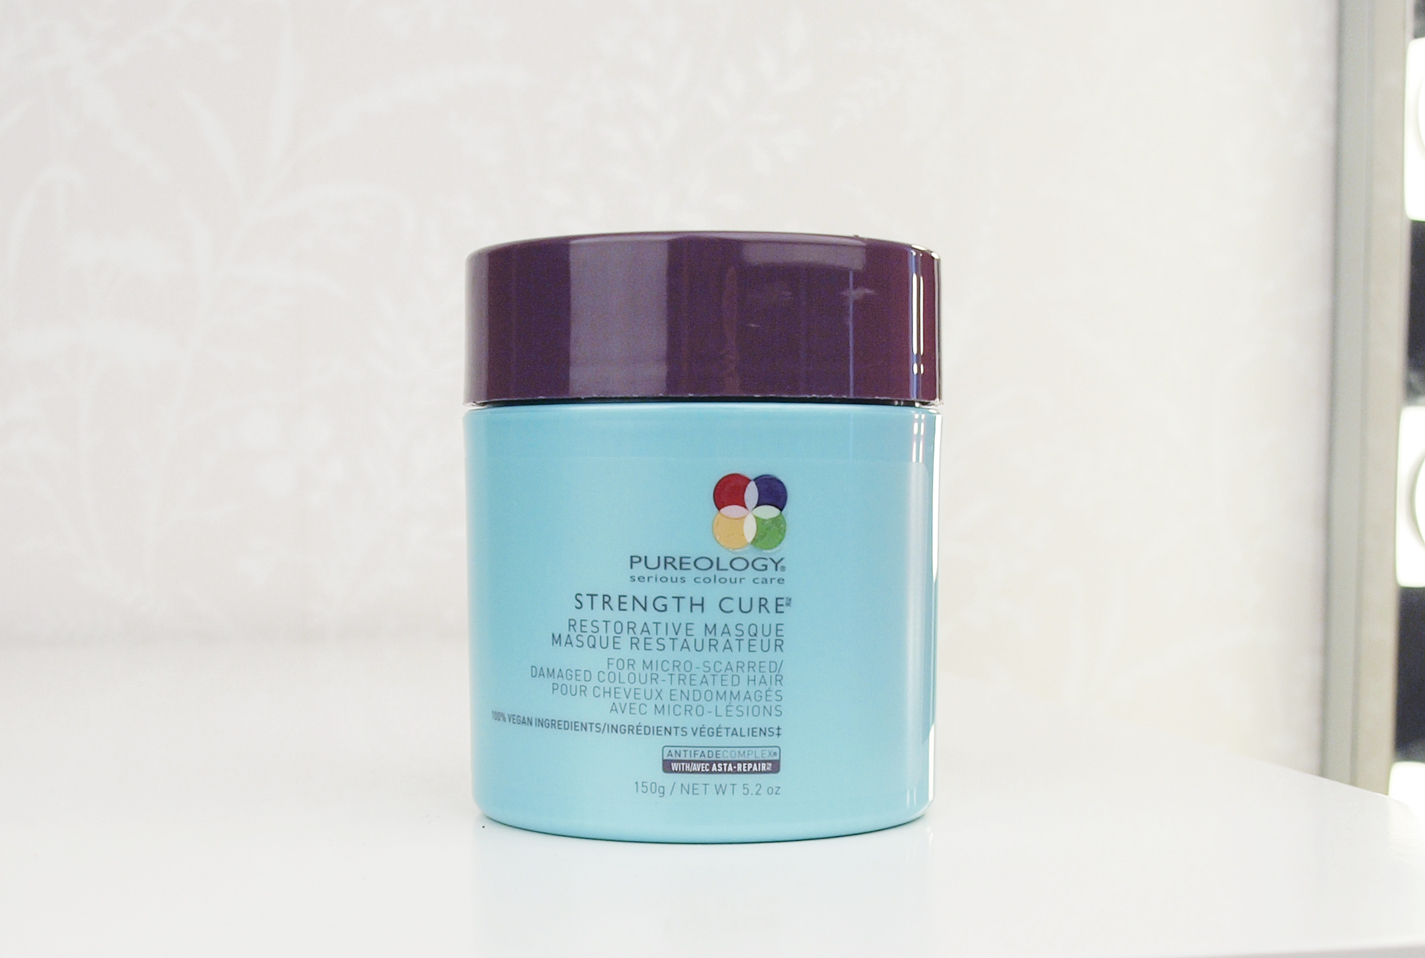 Pureology strength cure restorative masque